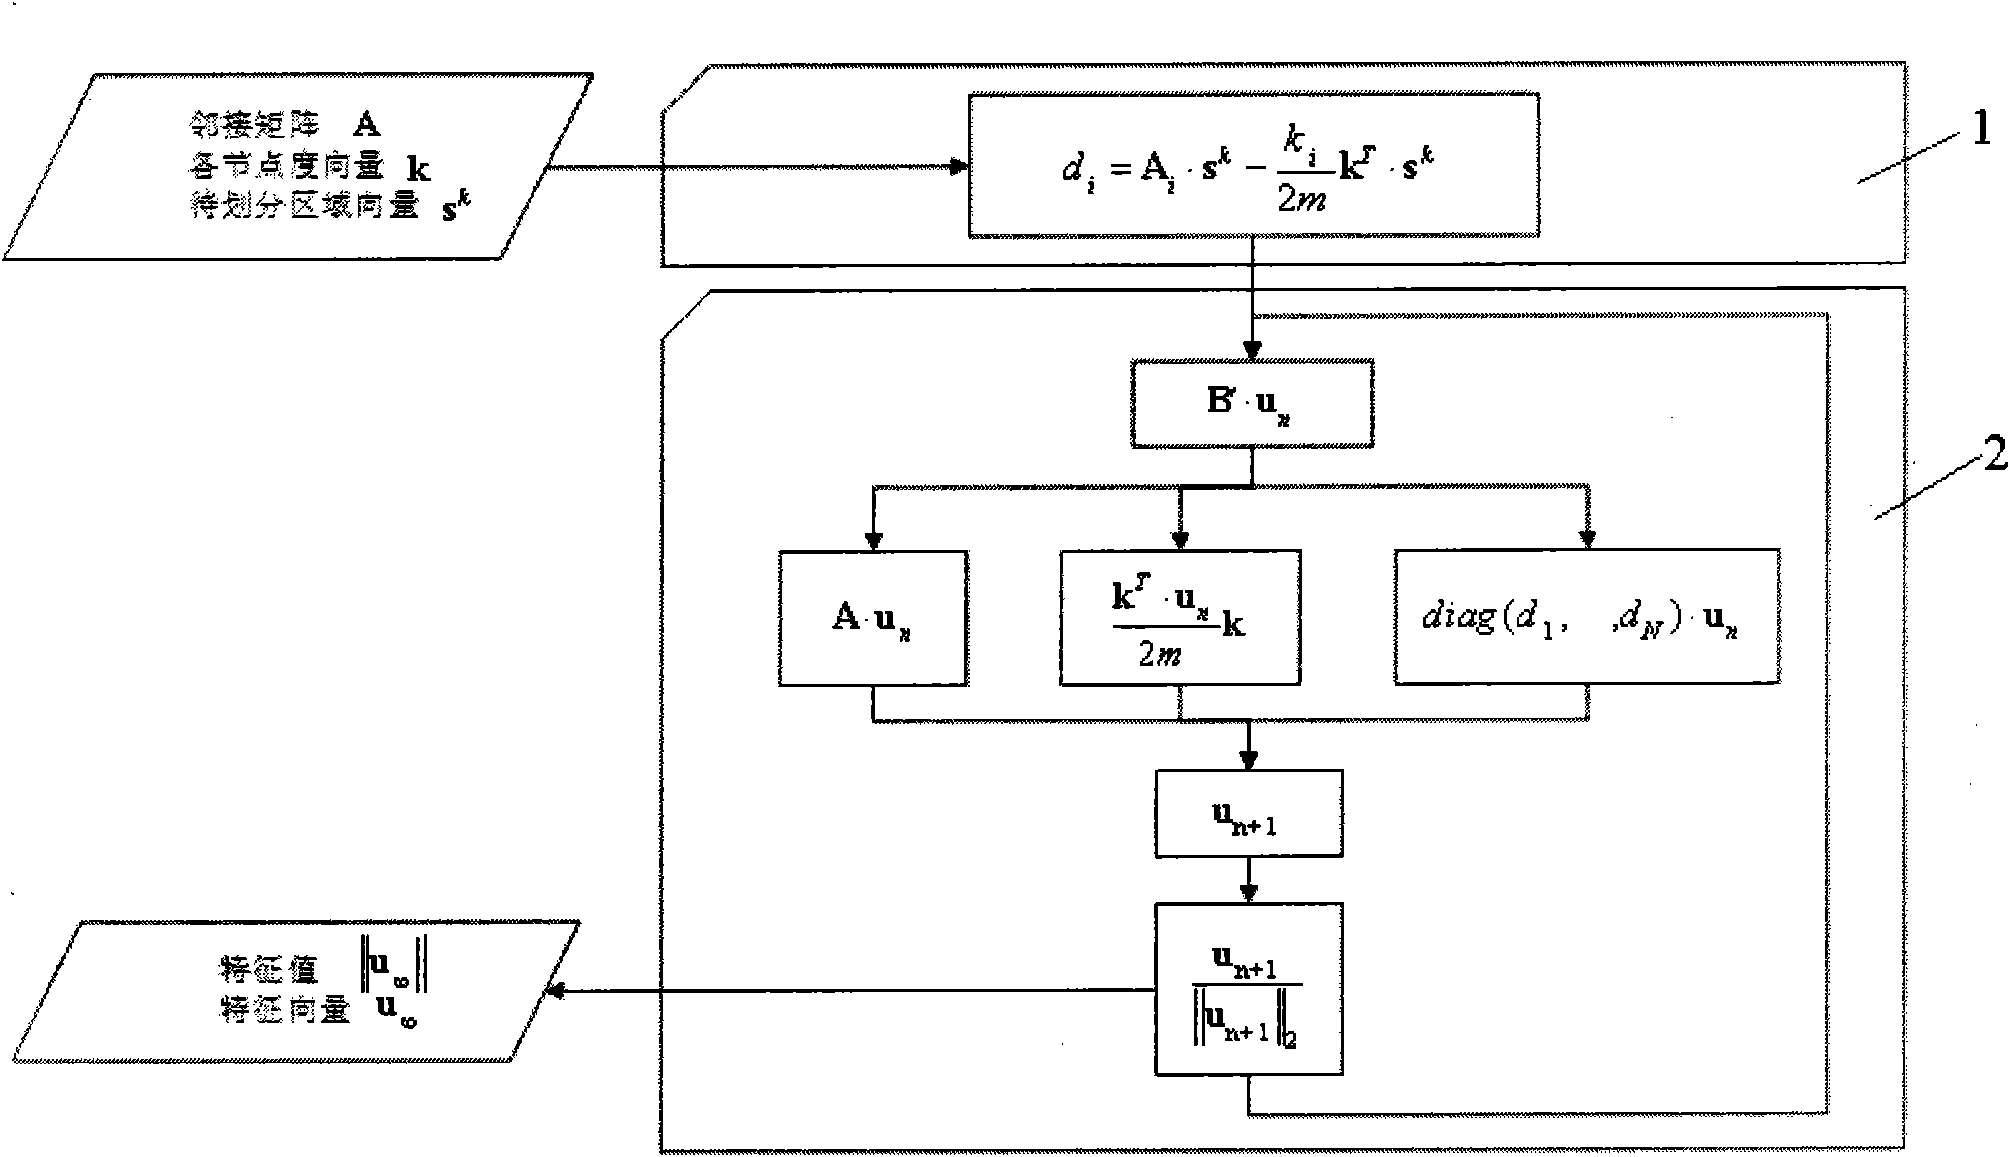 Method for partitioning large-scale static network based on graphics processor